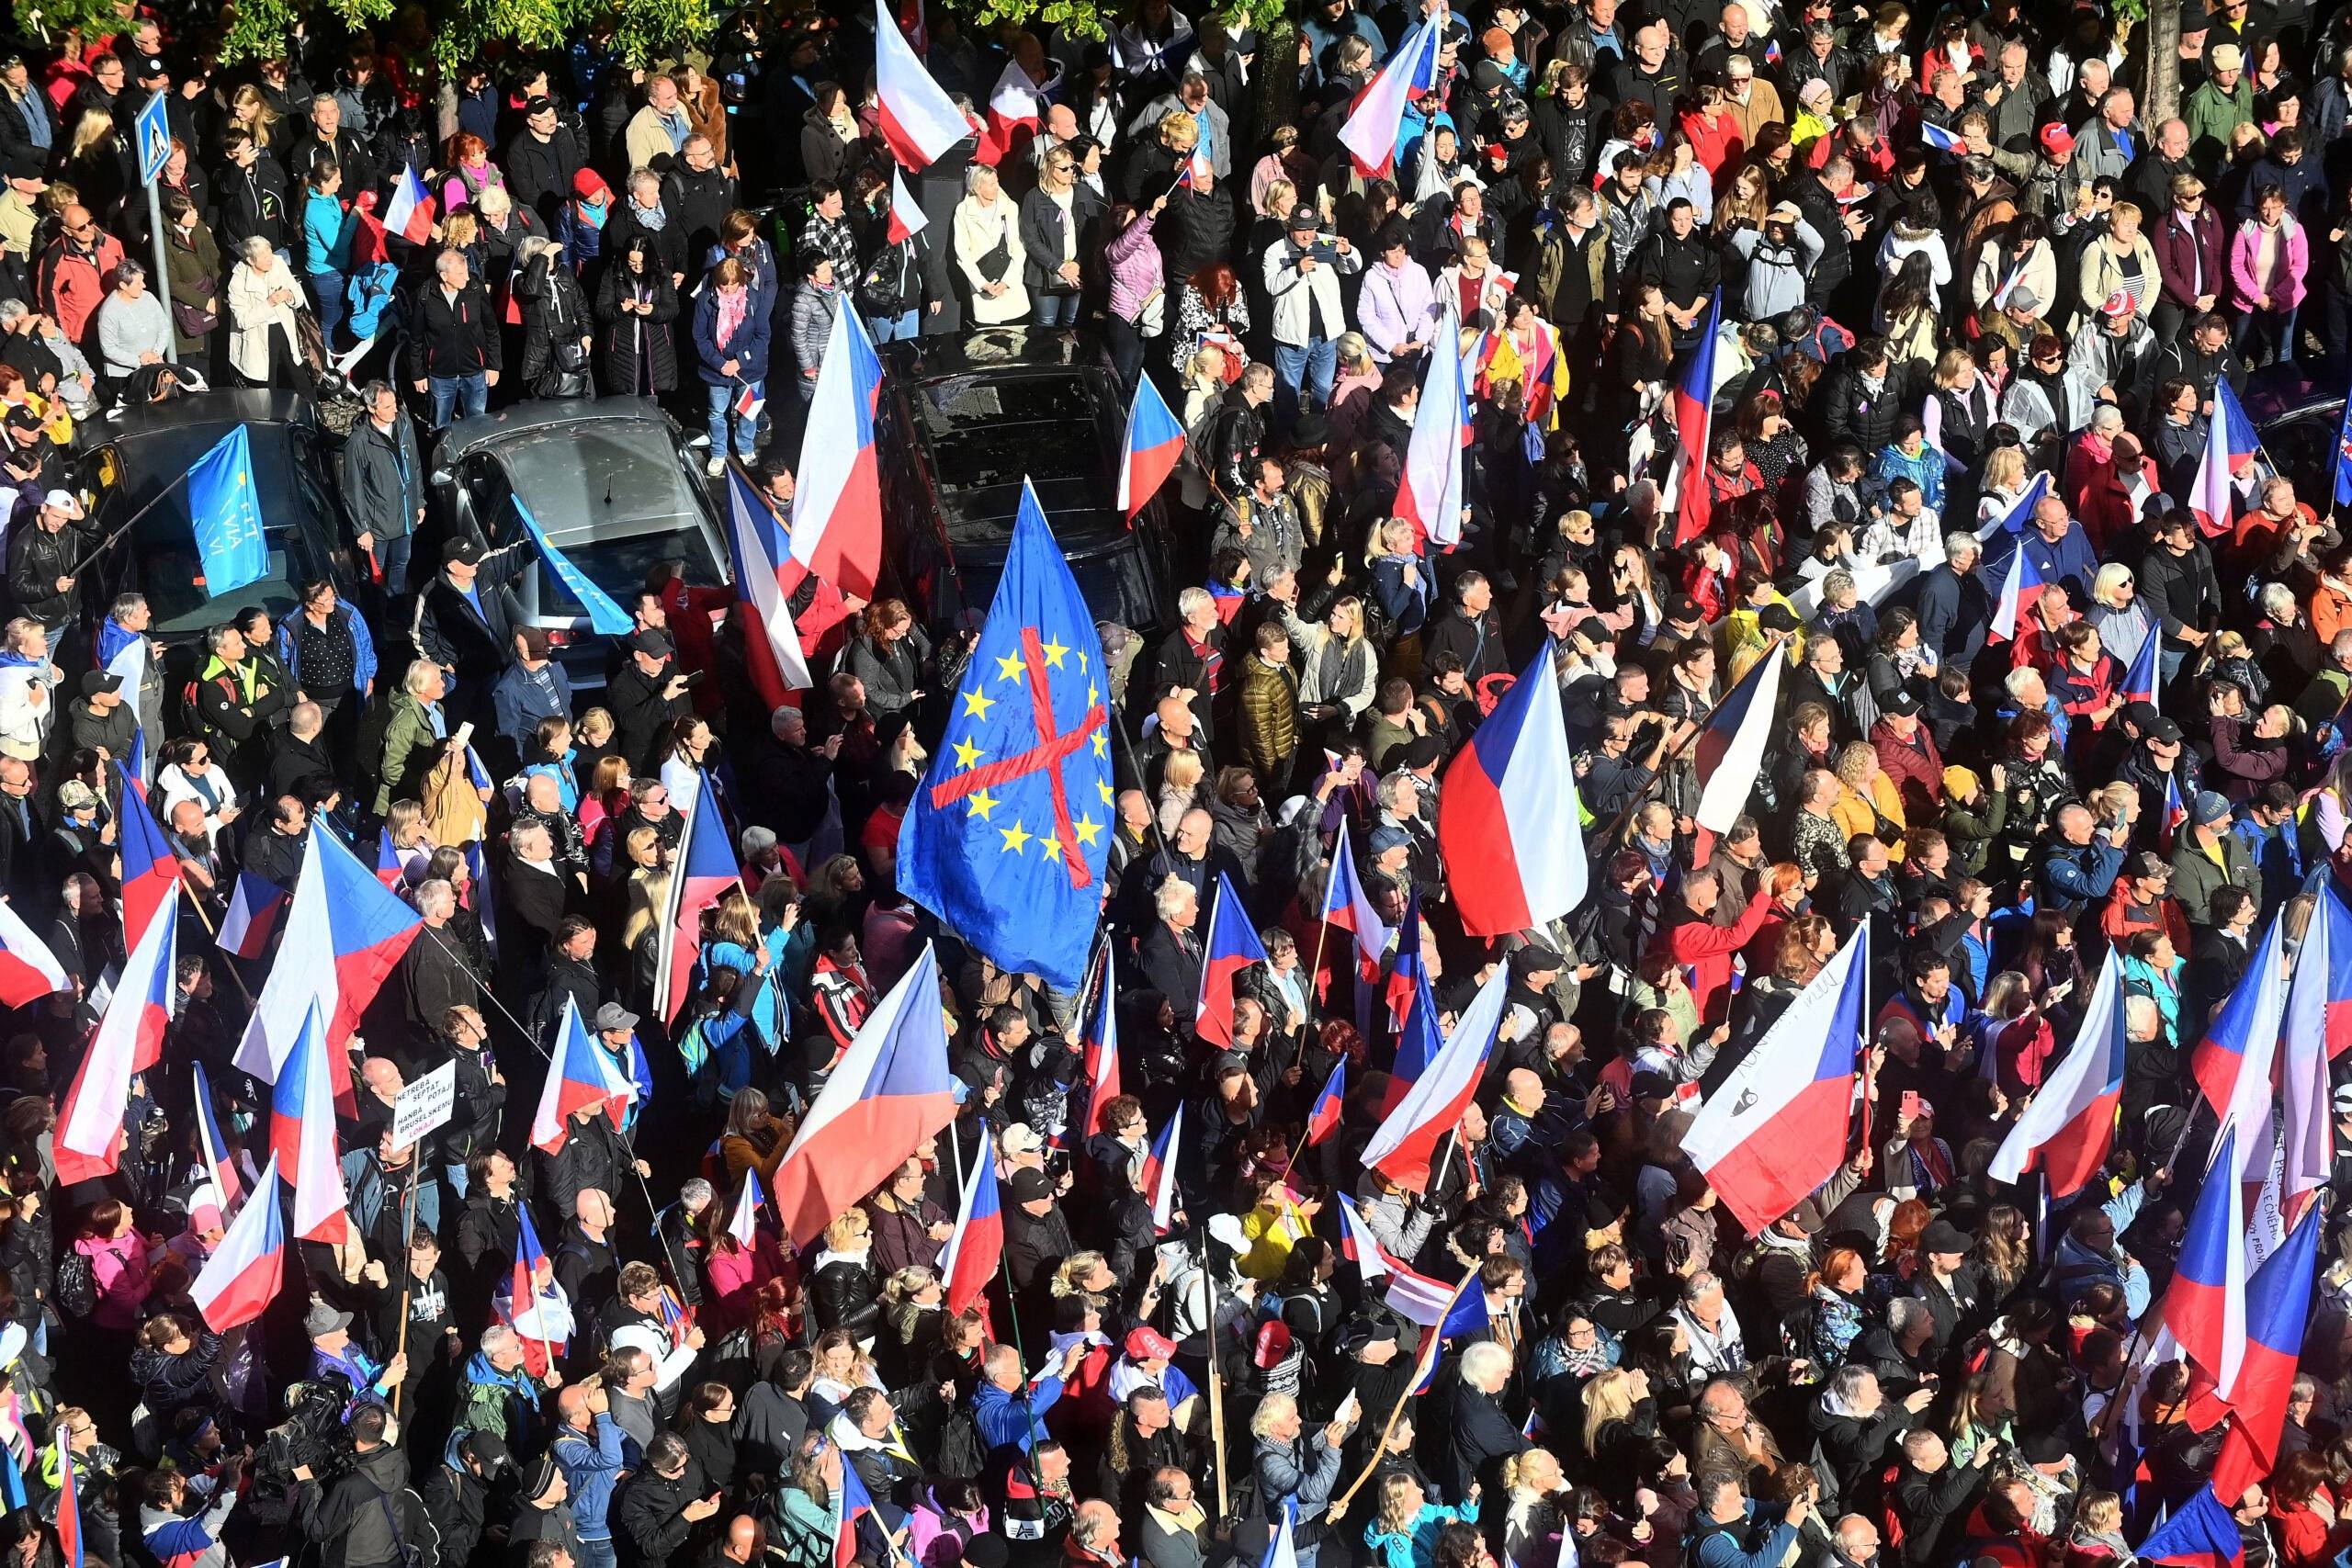 Several thousands of protesters including groups from the far-right and far-left wave Czech national flags as they take part in rally against the Czech government on September 28, 2022 in Prague. (Photo by Michal Cizek / AFP)